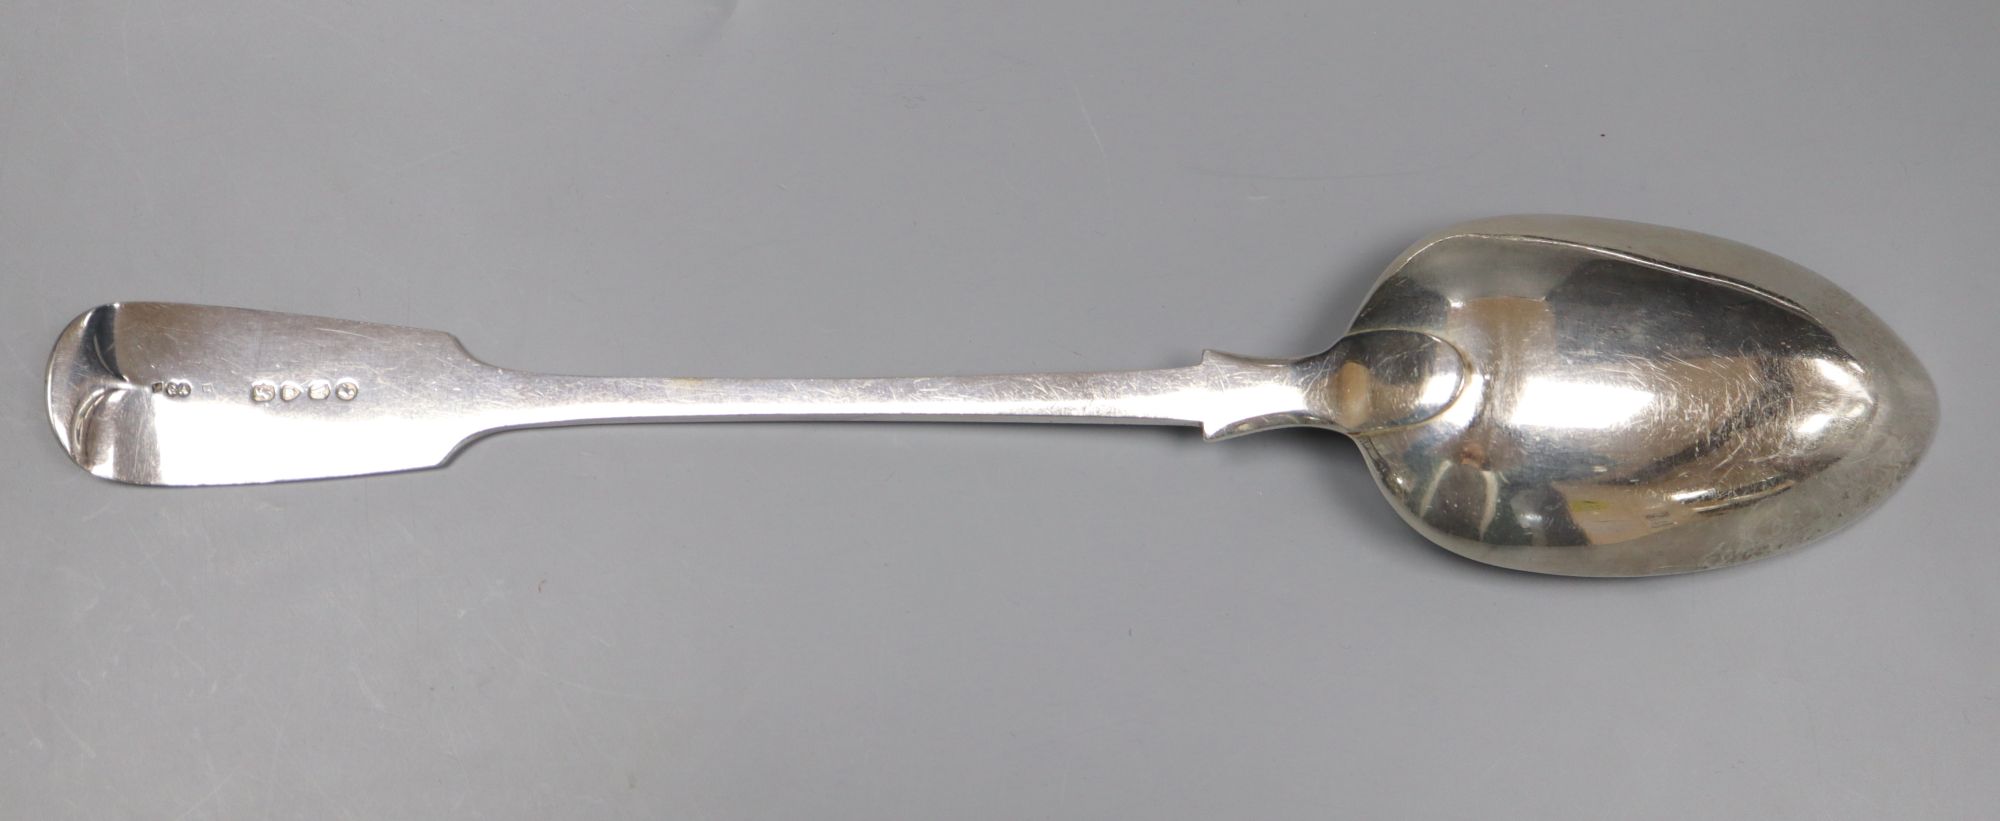 A Victorian silver fiddle pattern basting spoon, George Adams, London, 1876, 30.5cm, 4.5oz. - Image 2 of 3